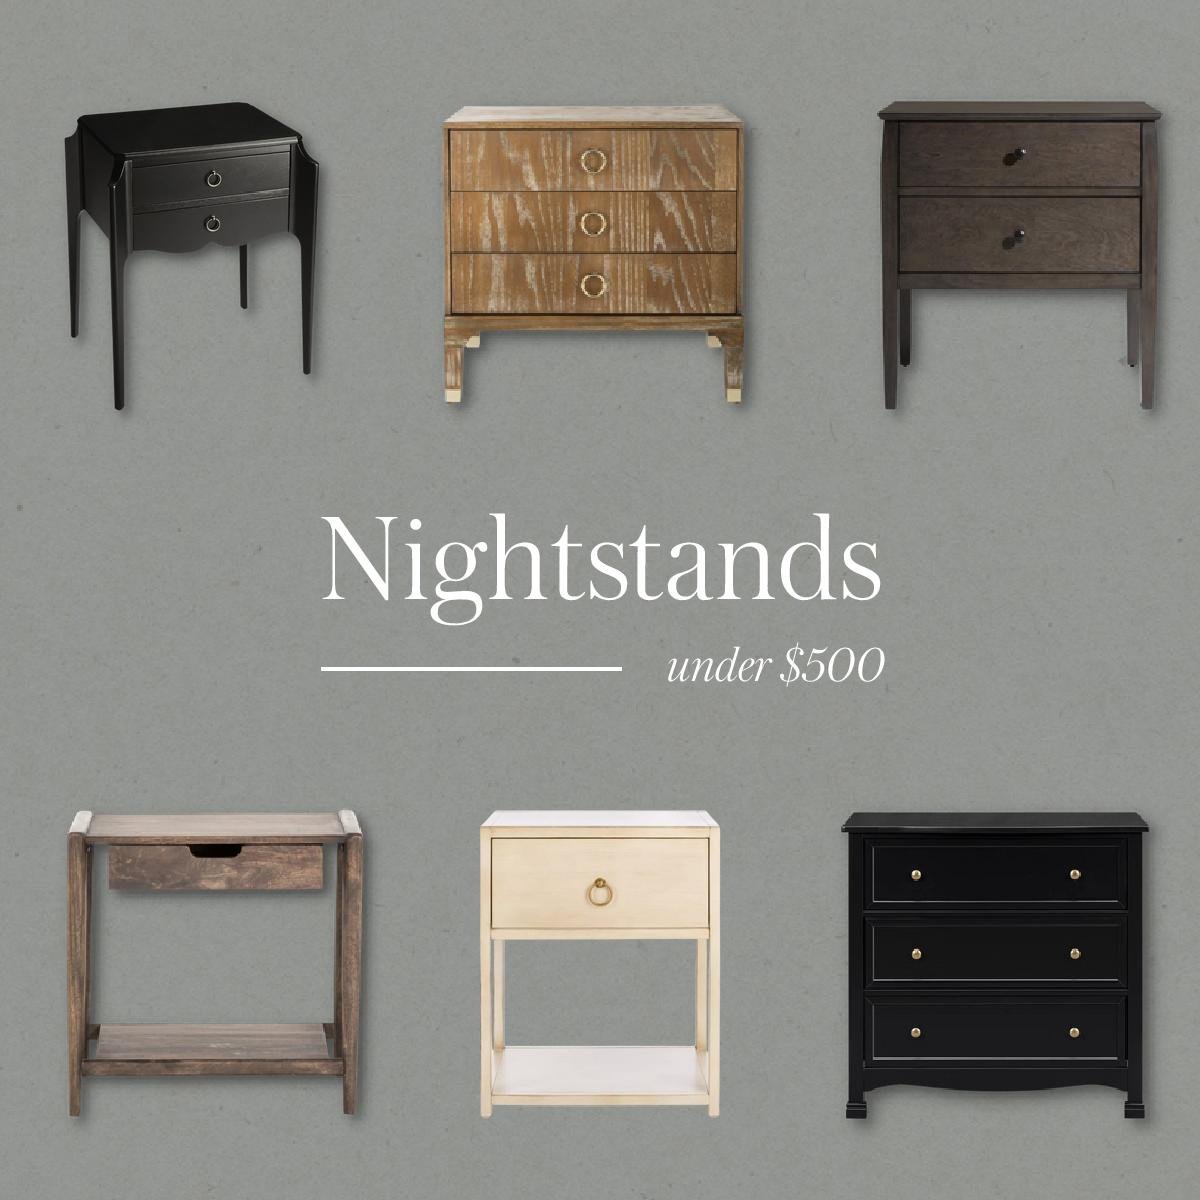 Nightstand Size Guide - Nadine Stay | What size nightstand you should get for a twin, queen, and king bed. Budget friendly nightstands. Nightstands under $500.